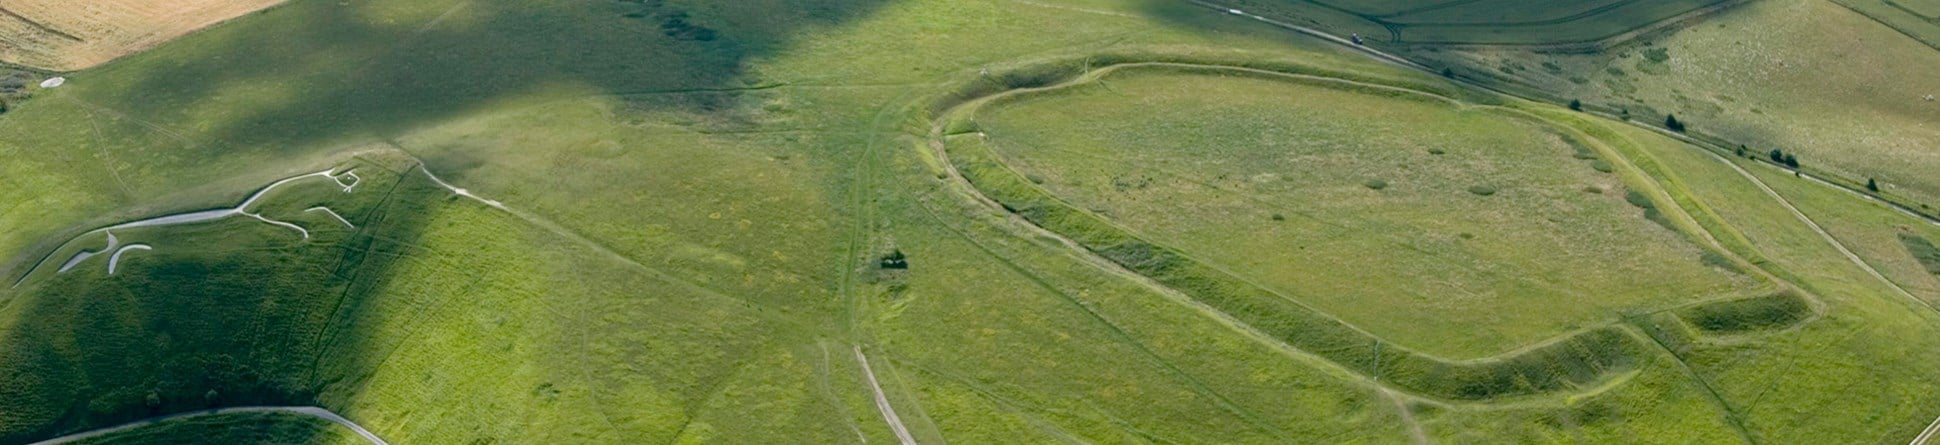 Colour aerial photograph showing a large banked earth enclosure to the right and a white chalk stylised figure of a horse left.